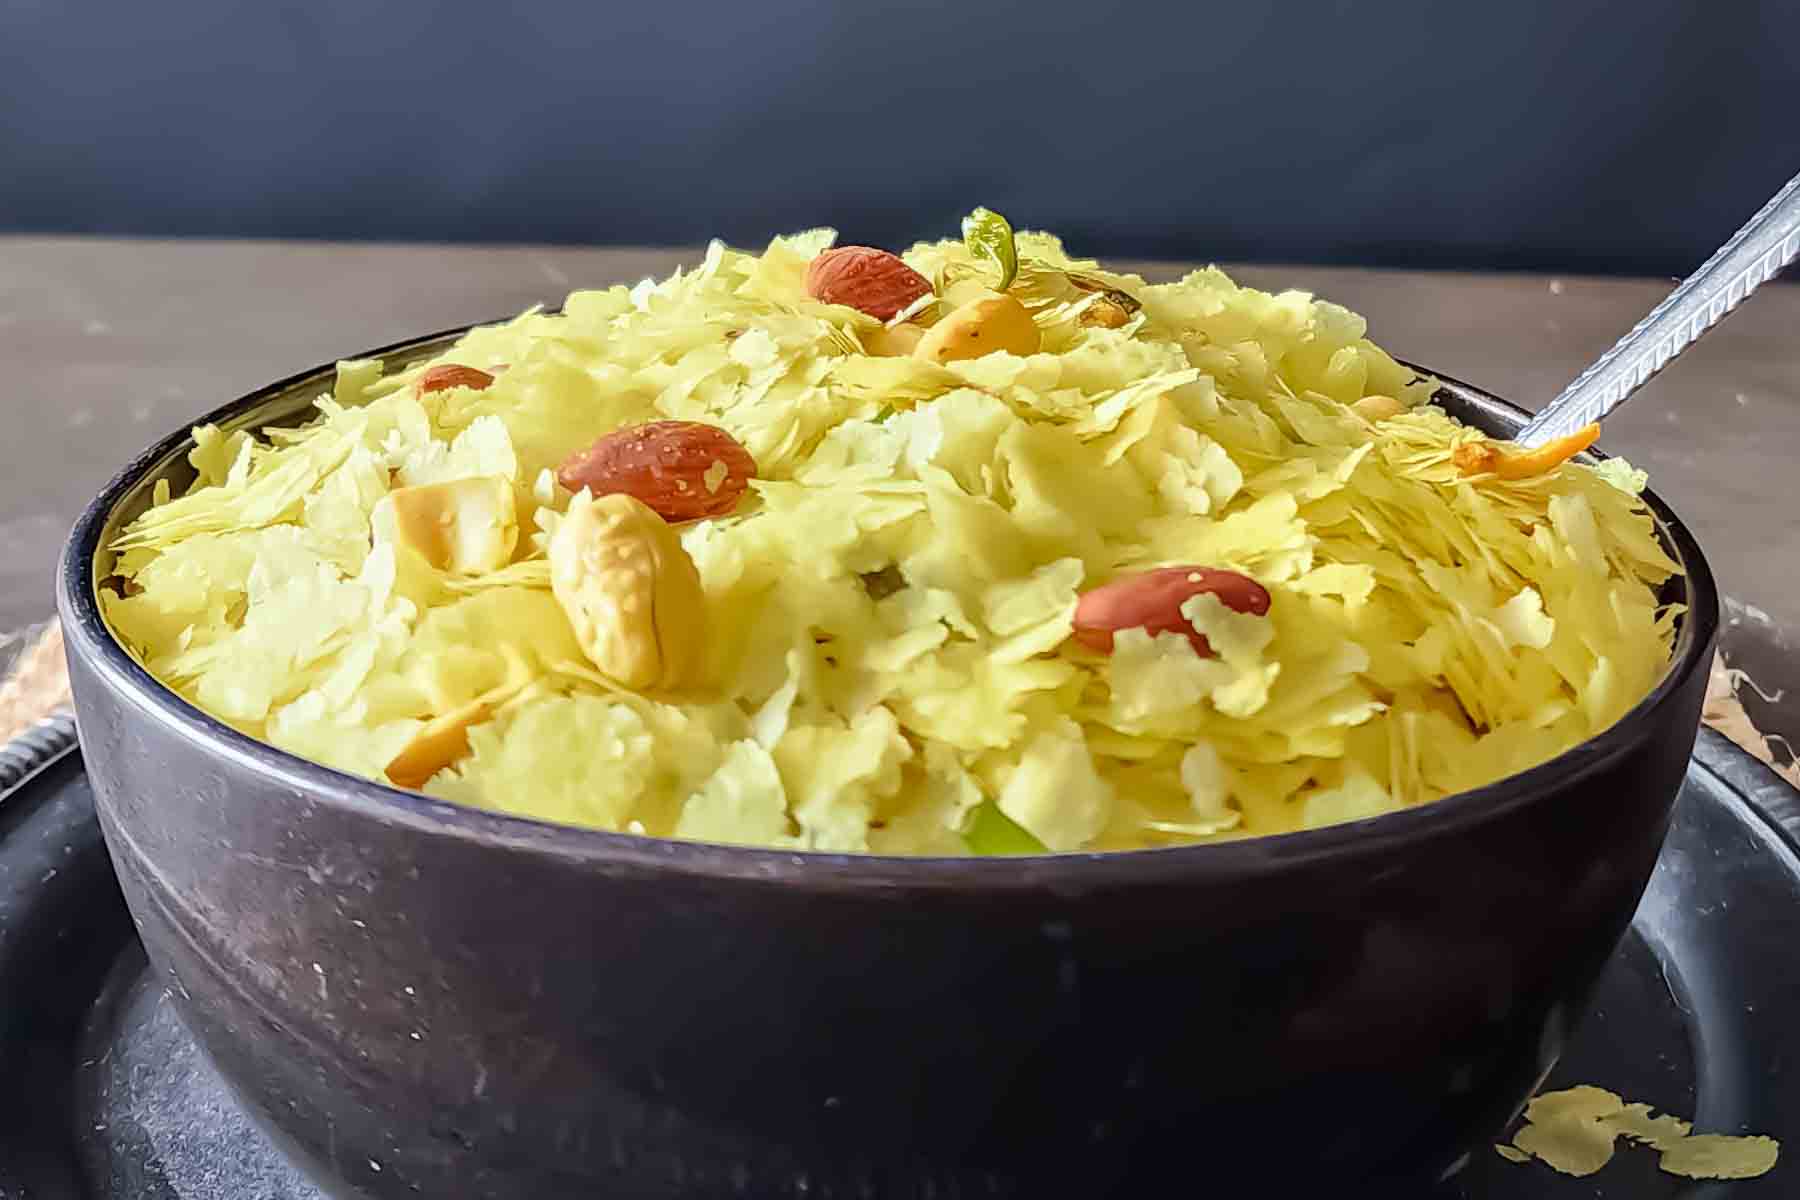 A bowl with spoon filled with yellow golden hued indian snack chivda.